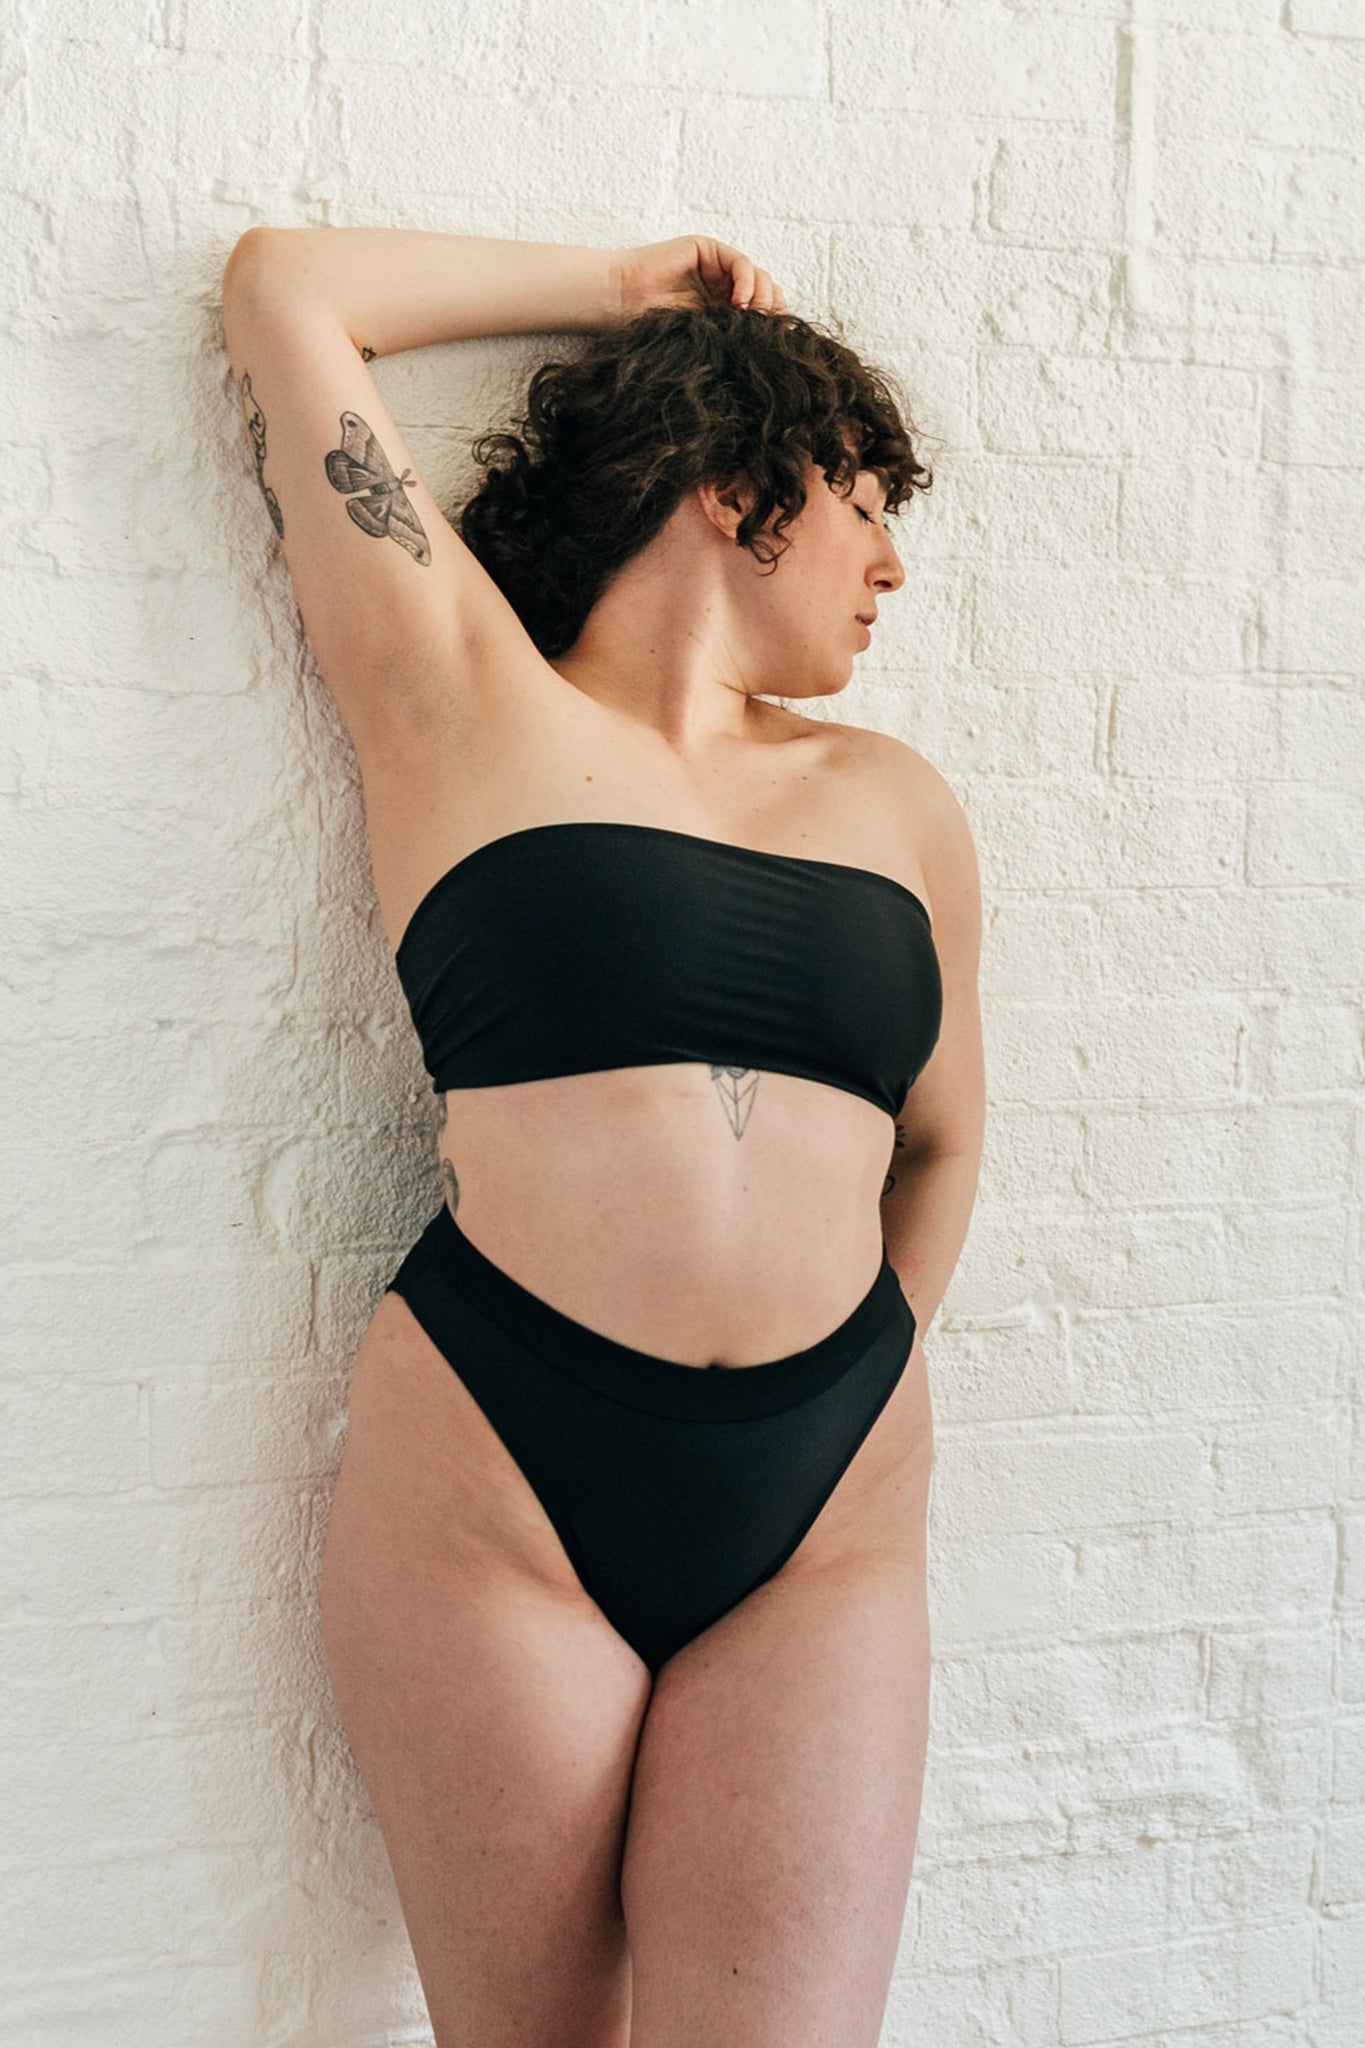 A woman leaning against a white wall looking to the side wearing black high waisted bikini bottoms with a matching black bandeau bikini top.